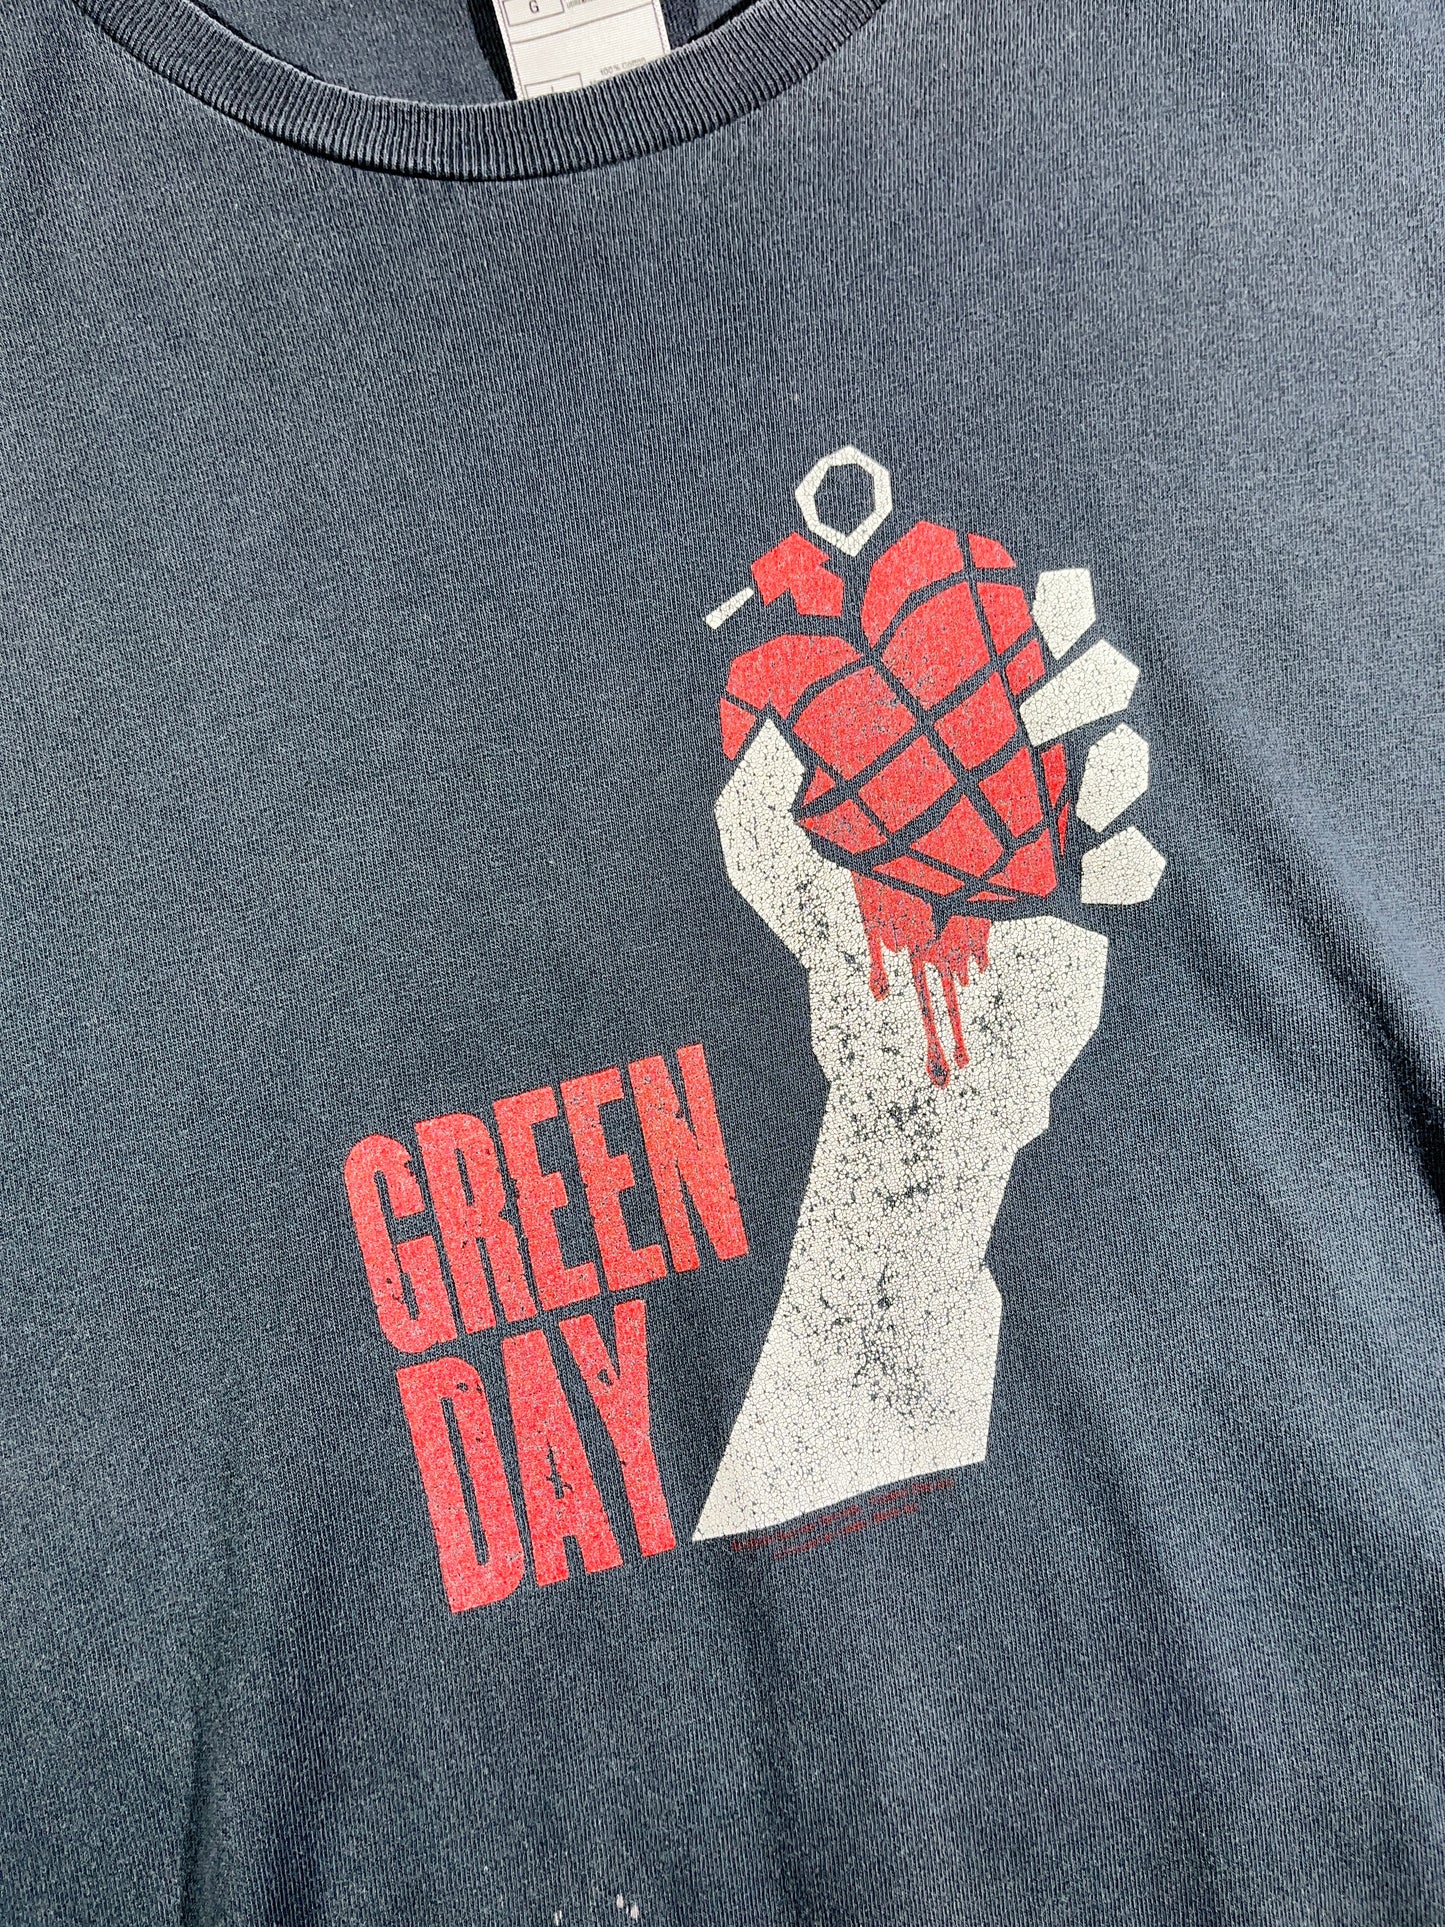 Vintage Green Day T-Shirt Band Tour Tee American Idiot